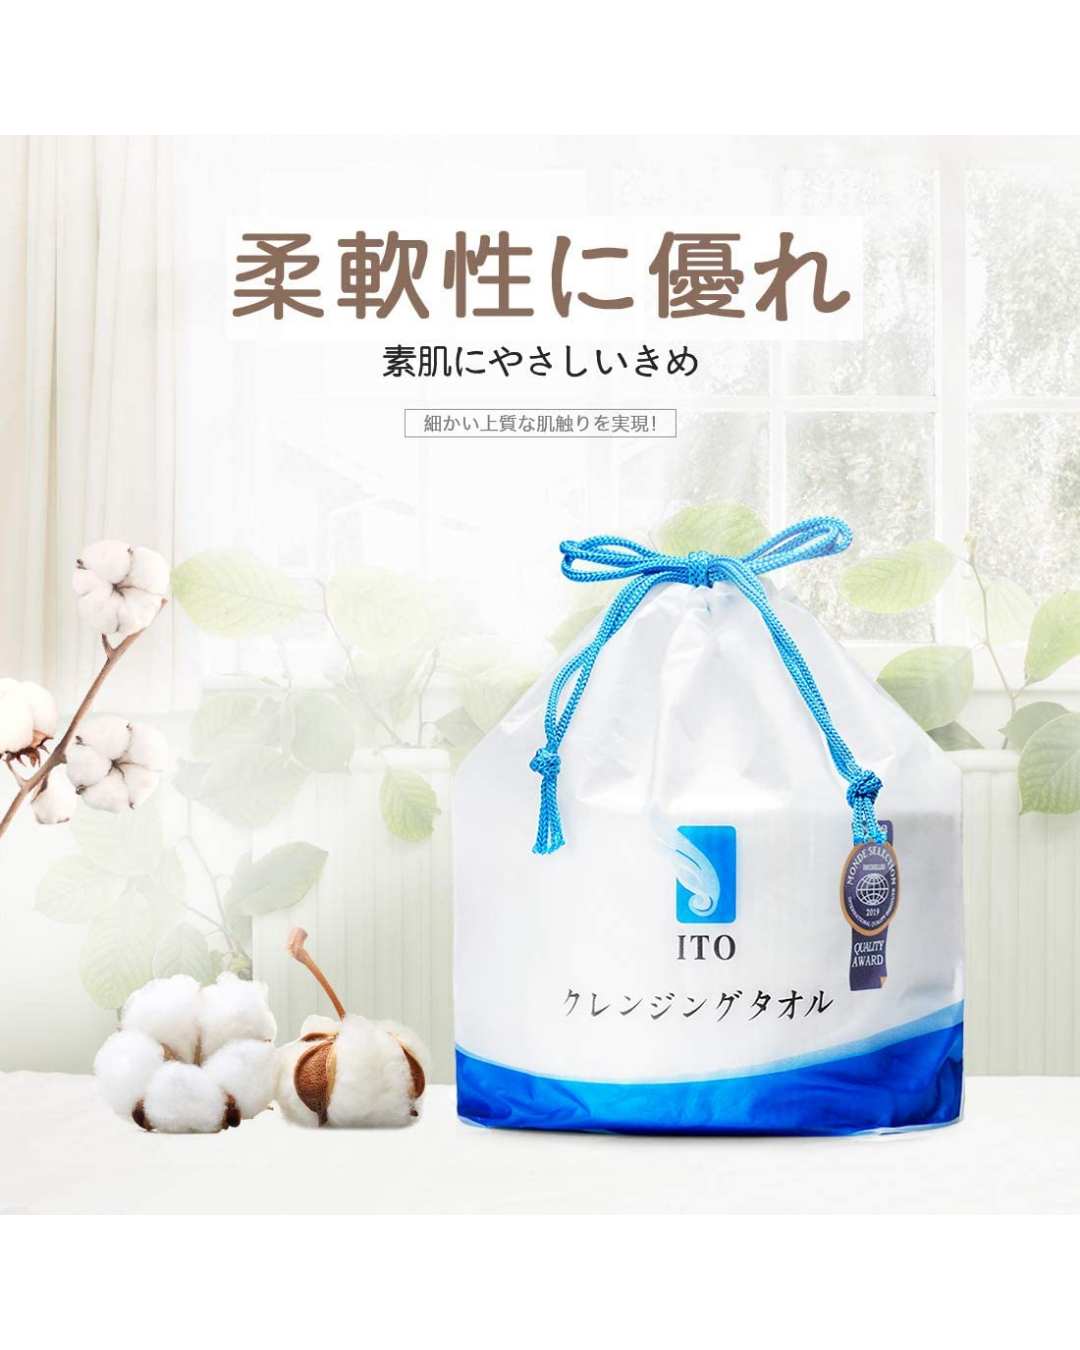 ITO Disposable Cleansing Towel - Unique Bunny